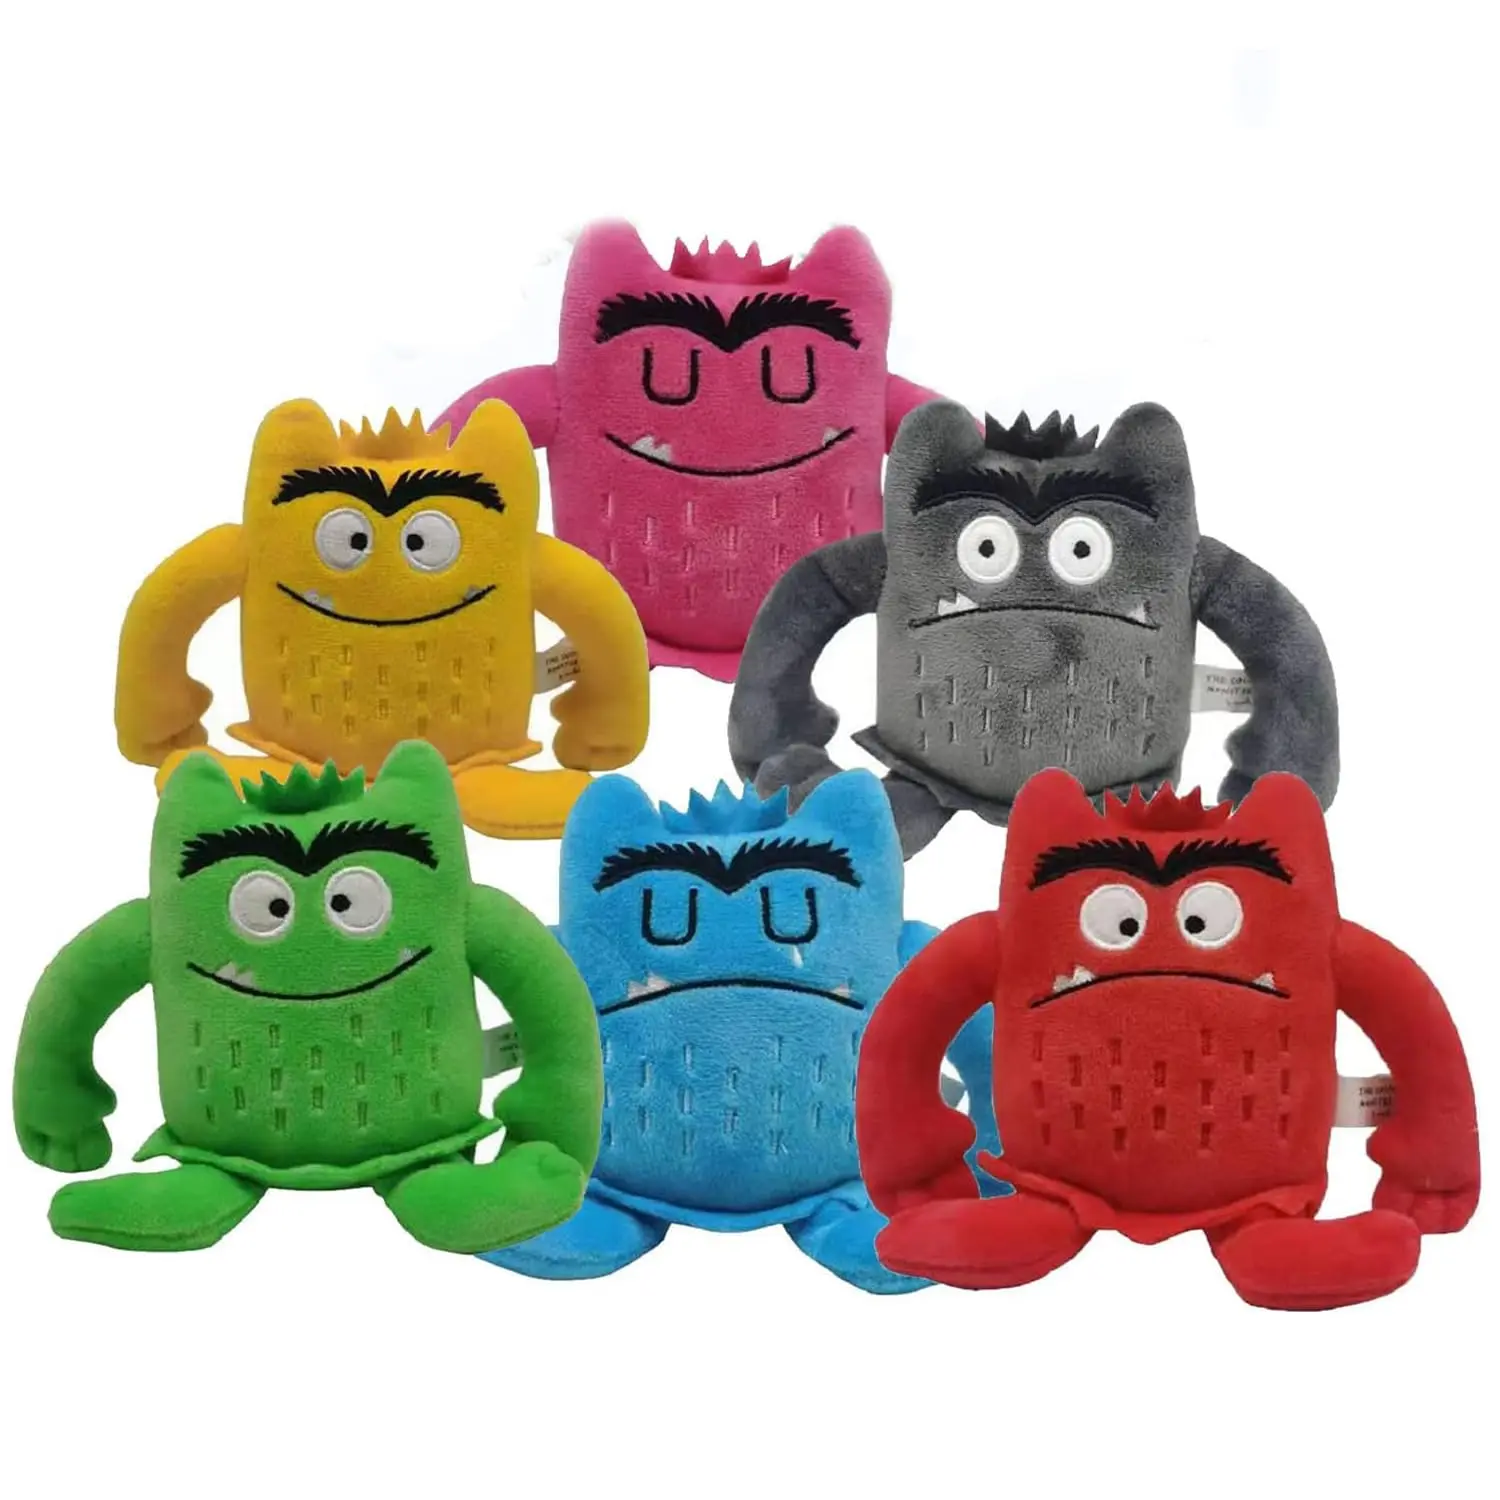 6pcs/set Kawaii The Color Monster Plush Doll Party Favors Decor Kids Baby Appease Emotions Plush Stuffed Toy For Children Gifts